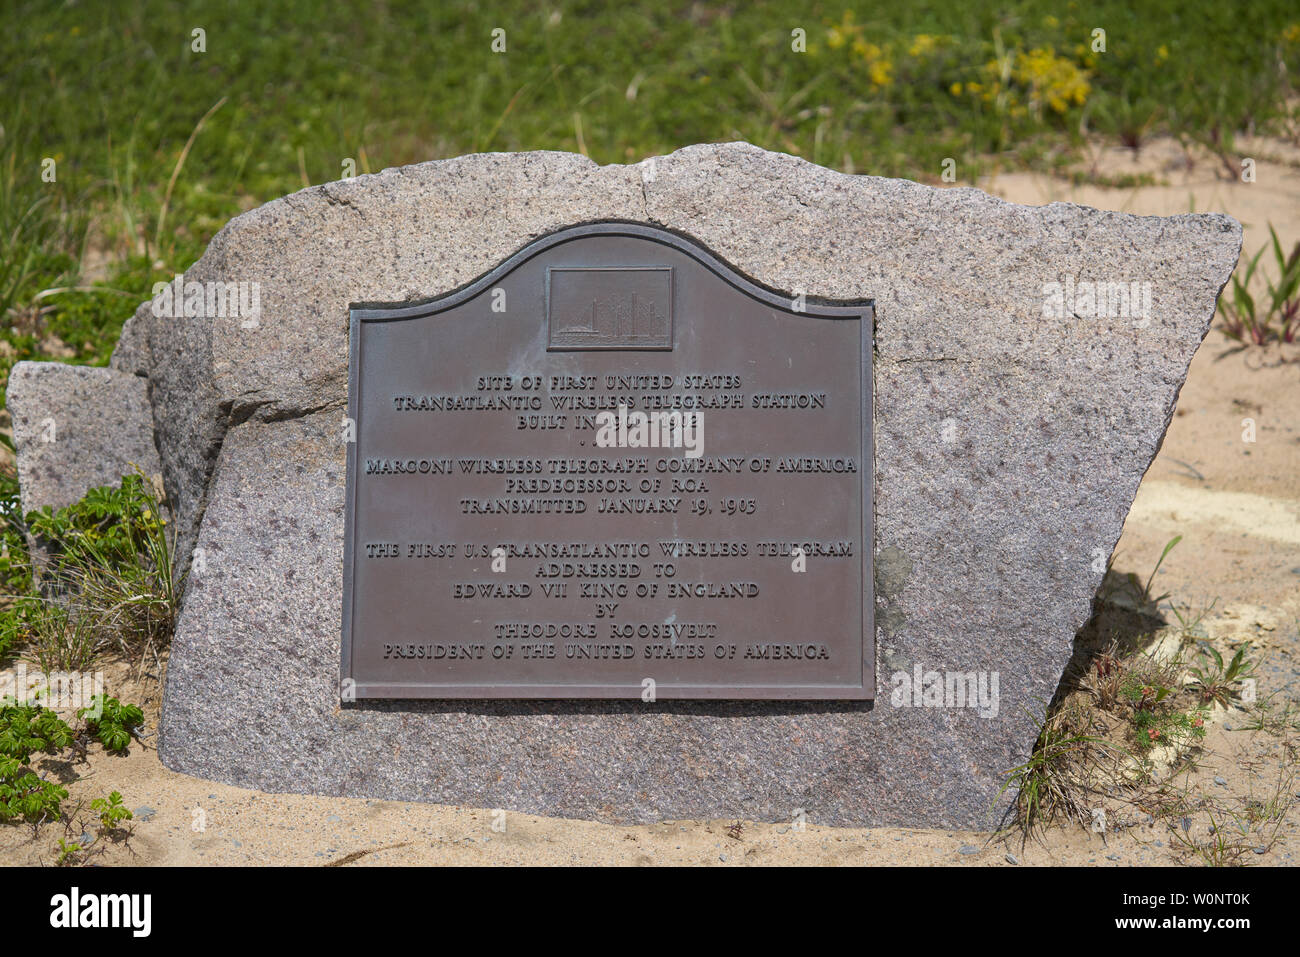 South Wellfleet, MA - June 12, 2019: This bronze plaque commemorates the site of the first US Transatlantic wireless telegraph station by Marconi Wire Stock Photo